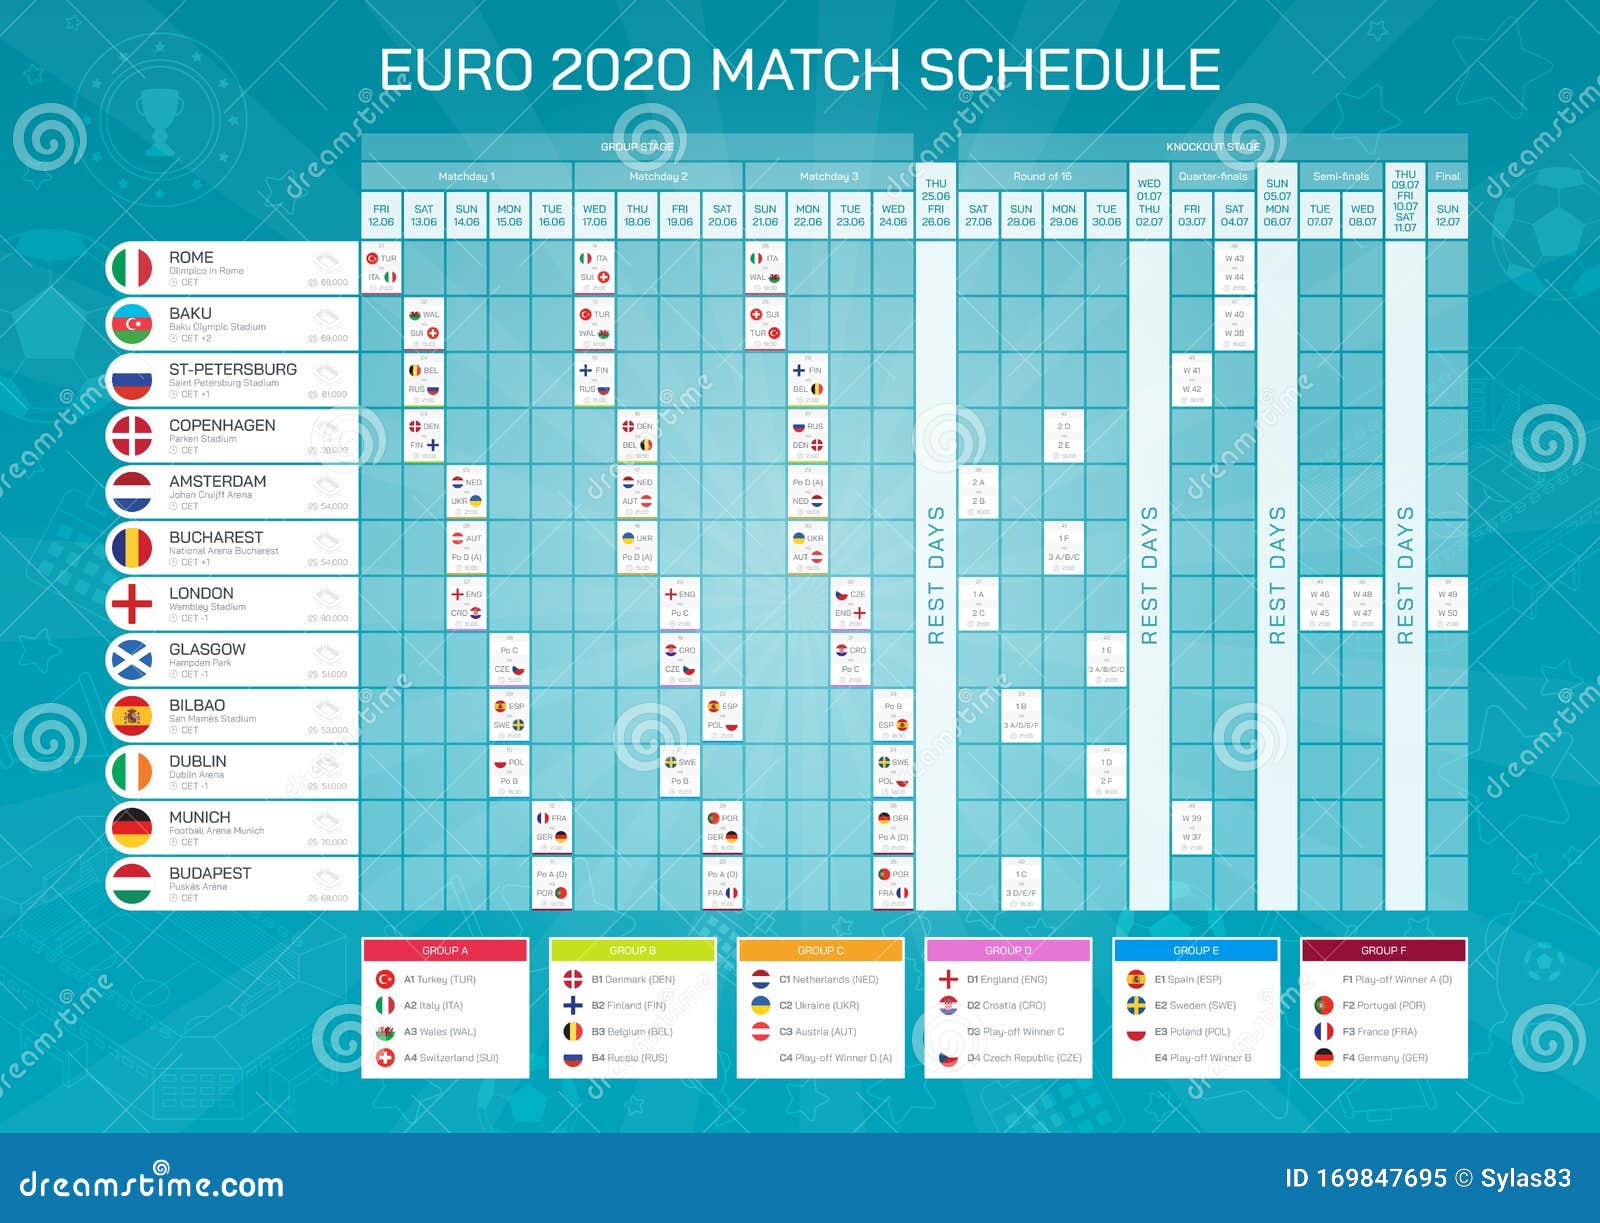 Euro 2020 Table : 1 289 Best Euro 2020 Images Stock Photos Vectors Adobe Stock / European championship news 'truly remarkable' for denmark to reach the knockout stages sebastian salazar and nedum onuoha discuss what it means for denmark to reach the last 16 of euro 2020.